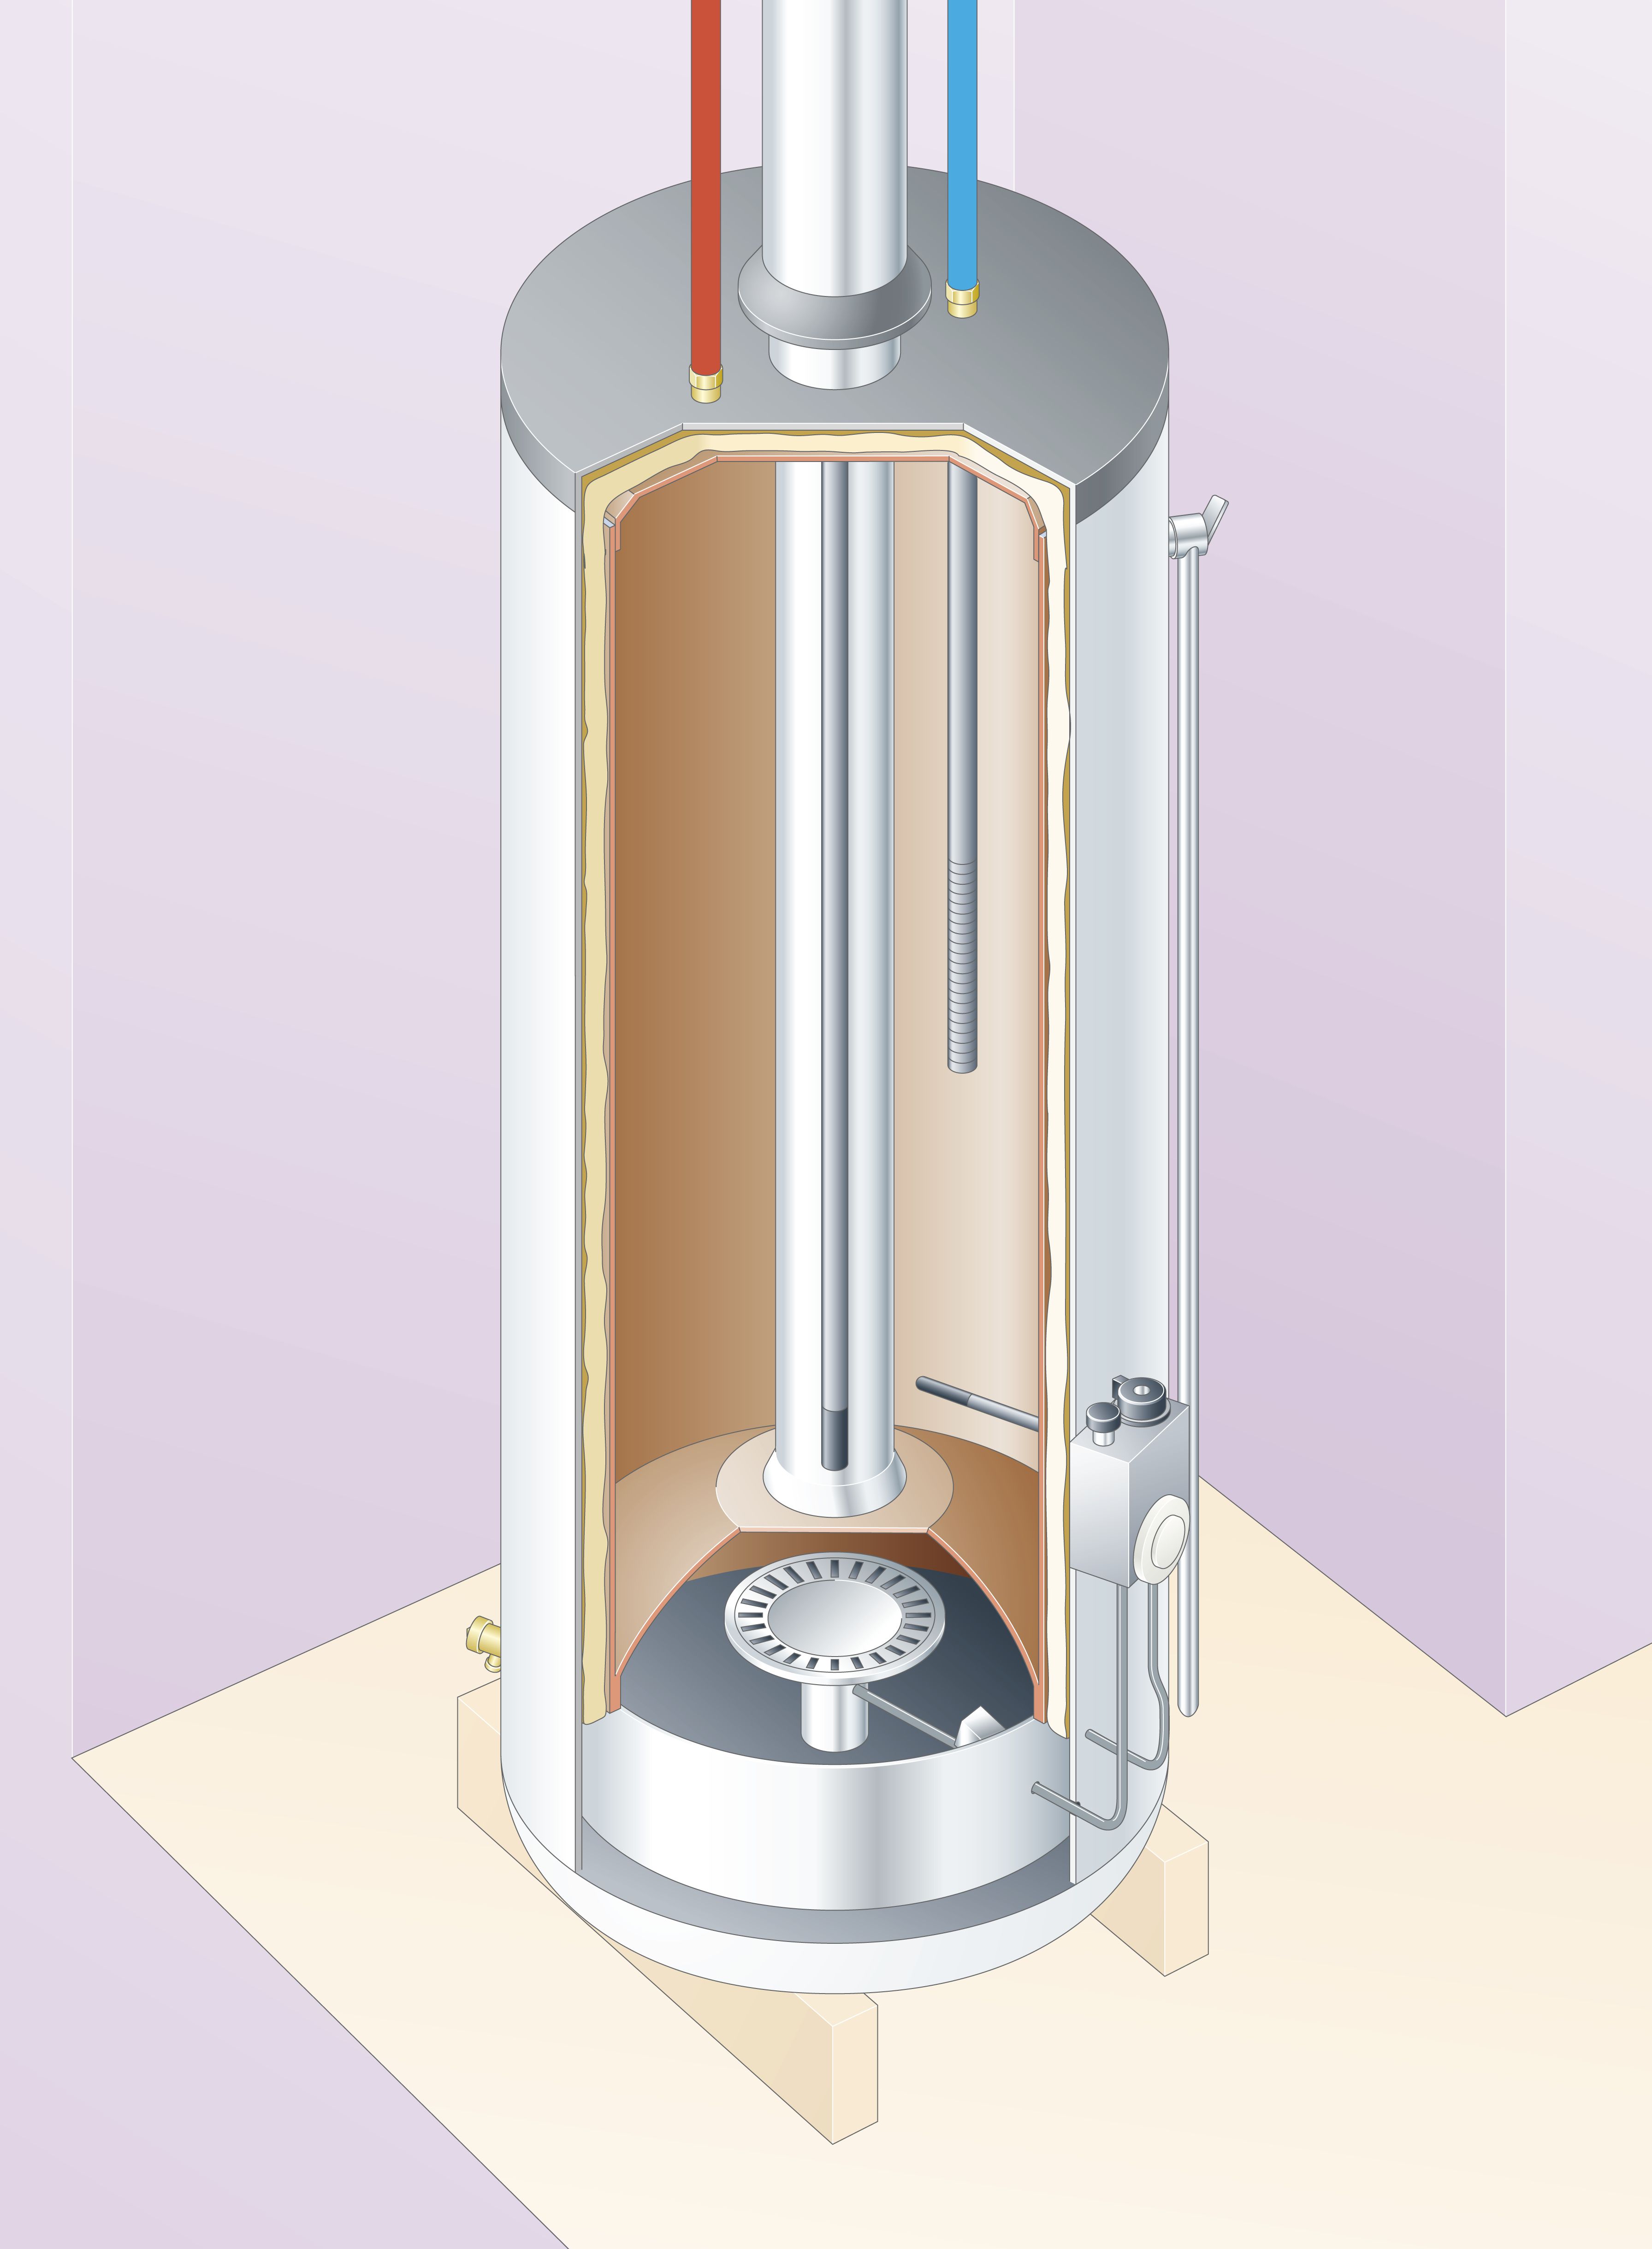 Anatomy of a Tank Type Gas Water Heater